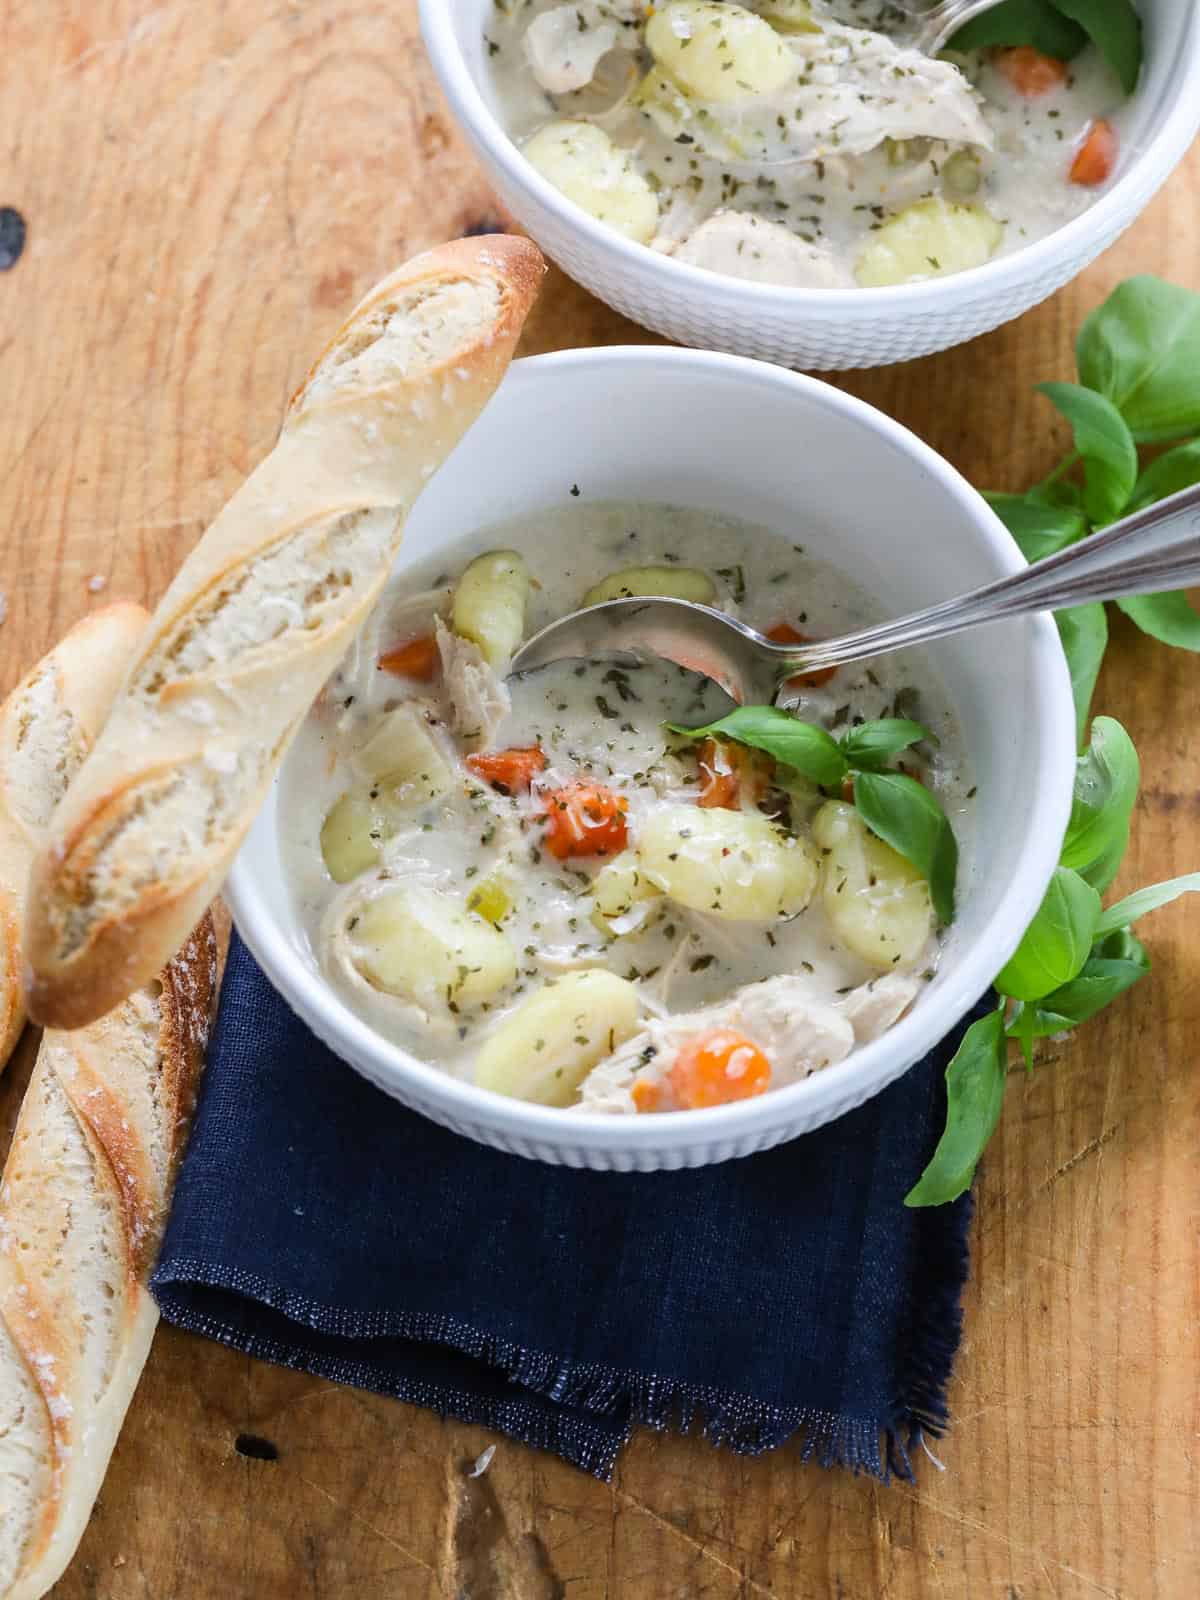 A bowl of Chicken Gnocchi Soup and a small baguette on the edge of the bowl.